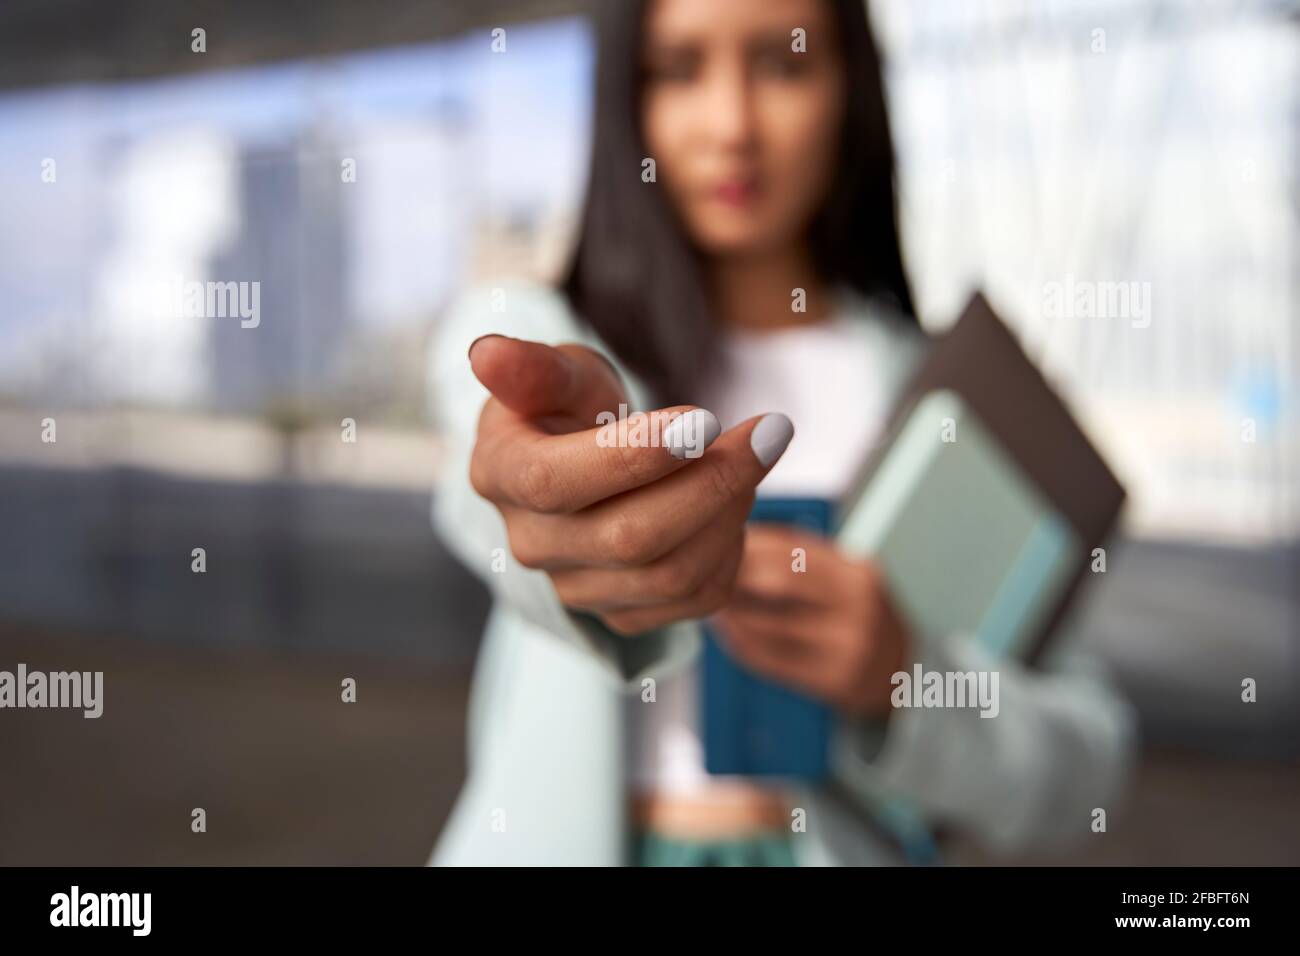 Female professional with hand outstretched Stock Photo